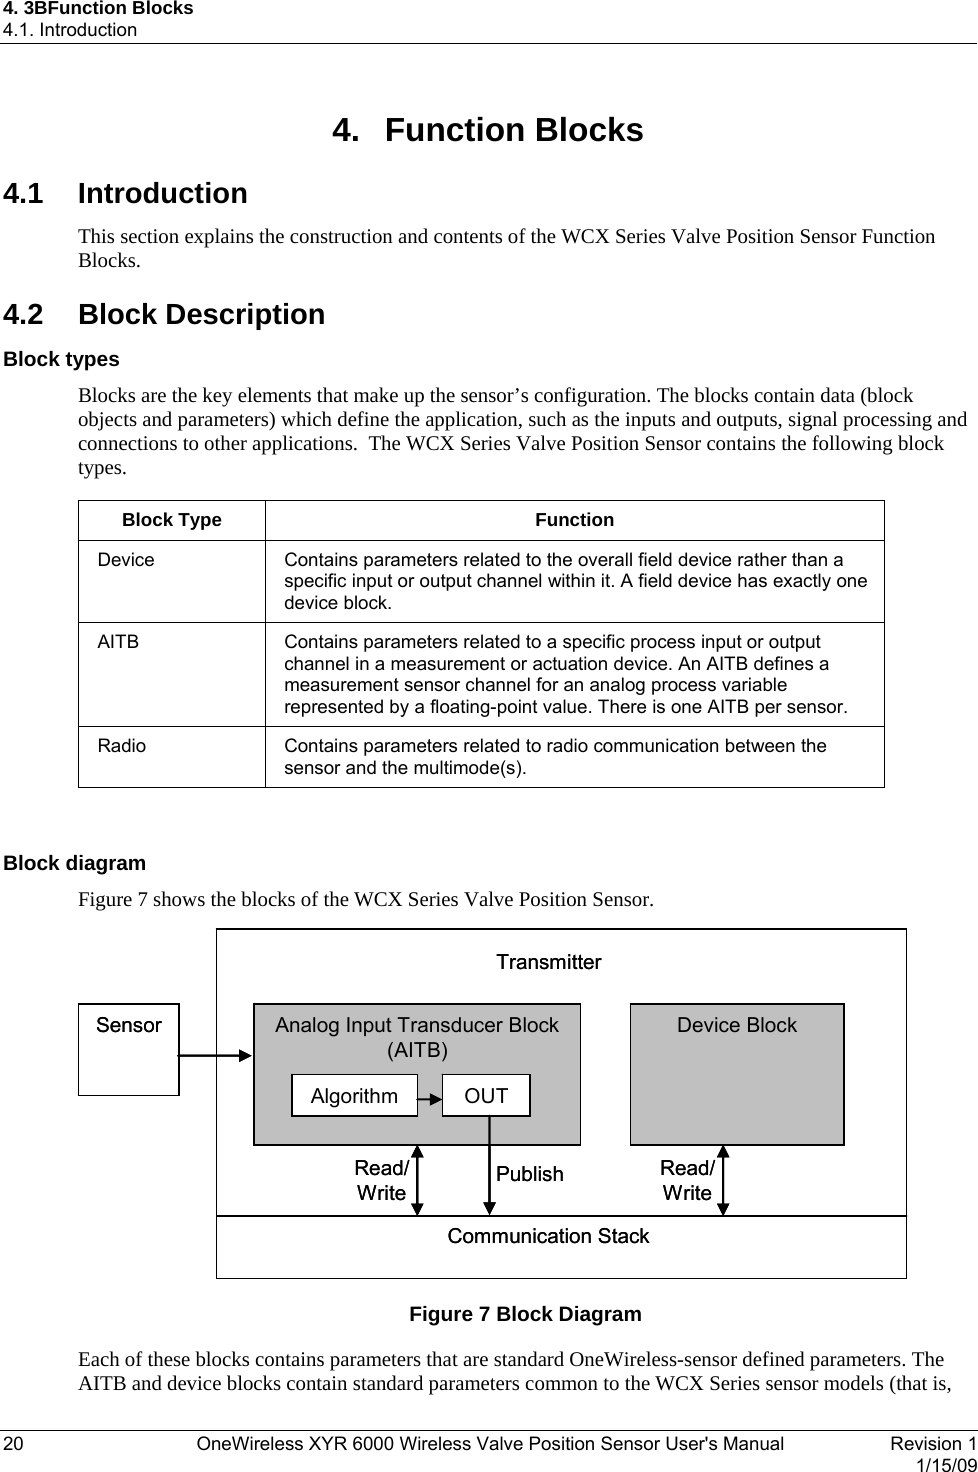 4. 3BFunction Blocks 4.1. Introduction 4.  Function Blocks 4.1 Introduction This section explains the construction and contents of the WCX Series Valve Position Sensor Function Blocks. 4.2 Block Description Block types Blocks are the key elements that make up the sensor’s configuration. The blocks contain data (block objects and parameters) which define the application, such as the inputs and outputs, signal processing and connections to other applications.  The WCX Series Valve Position Sensor contains the following block types.  Block Type  Function Device  Contains parameters related to the overall field device rather than a specific input or output channel within it. A field device has exactly one device block. AITB  Contains parameters related to a specific process input or output channel in a measurement or actuation device. An AITB defines a measurement sensor channel for an analog process variable represented by a floating-point value. There is one AITB per sensor.   Radio  Contains parameters related to radio communication between the sensor and the multimode(s).   Block diagram Figure 7 shows the blocks of the WCX Series Valve Position Sensor. Sensor Analog Input Transducer Block (AITB)TransmitterDevice BlockCommunication StackAlgorithm OUTRead/Write Publish Read/WriteSensor Analog Input Transducer Block (AITB)TransmitterDevice BlockCommunication StackAlgorithm OUTRead/Write Publish Read/Write Figure 7 Block Diagram Each of these blocks contains parameters that are standard OneWireless-sensor defined parameters. The AITB and device blocks contain standard parameters common to the WCX Series sensor models (that is, 20  OneWireless XYR 6000 Wireless Valve Position Sensor User&apos;s Manual   Revision 1   1/15/09 